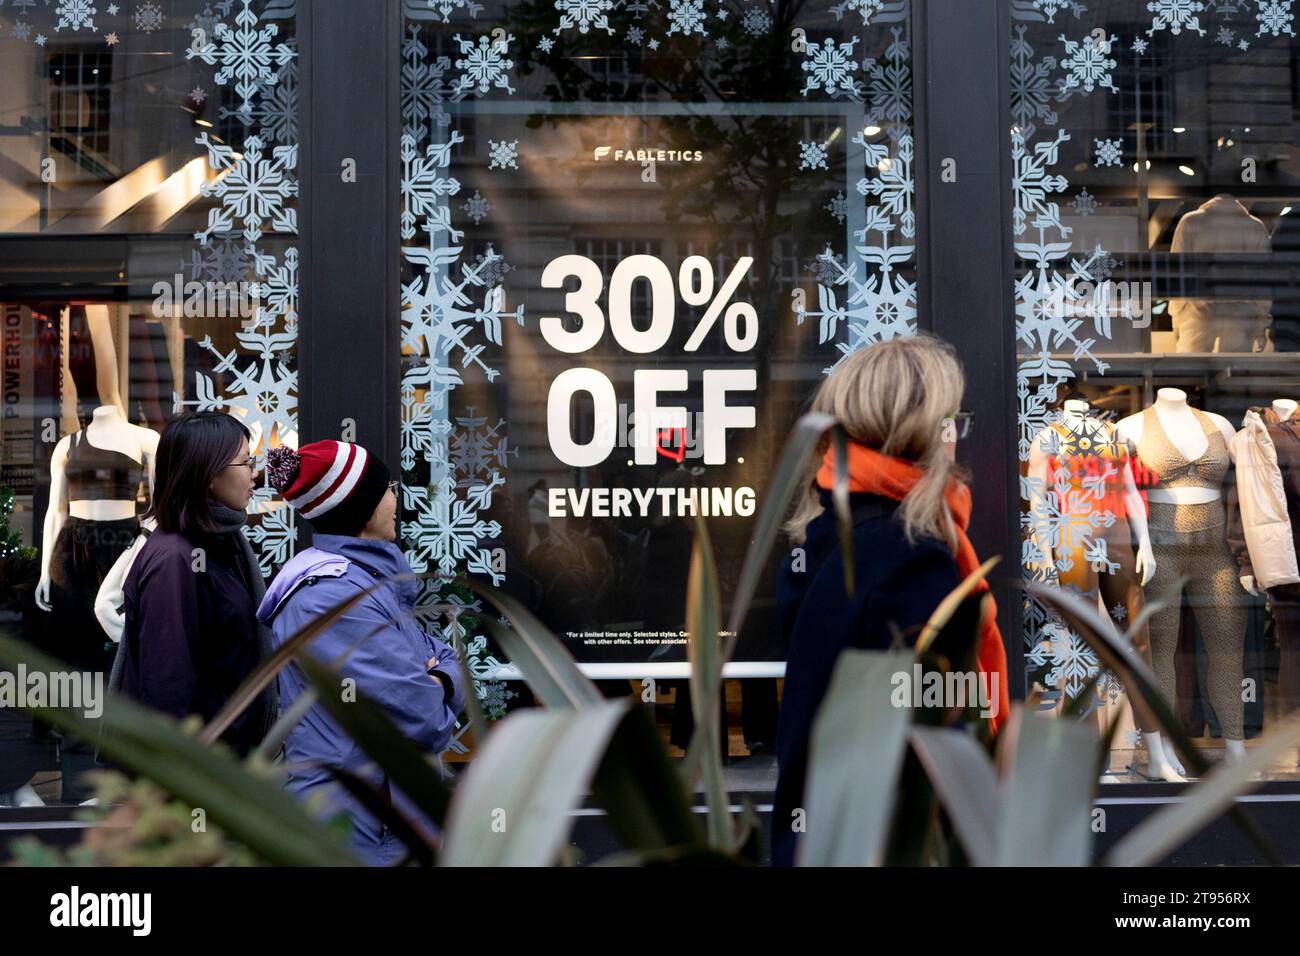 https://c8.alamy.com/comp/2T956RX/shoppers-pay-attention-on-the-discount-notice-for-upcoming-black-friday-sale-displayed-on-the-shop-window-on-fabletics-a-clothing-store-in-reagent-street-london-retailers-in-central-london-advertise-black-friday-discount-on-their-shops-to-boost-sale-prior-to-the-festive-periods-in-december-chancellor-jeremy-hunt-unveil-his-autumn-statement-today-at-the-uk-parliament-to-boost-the-economy-after-uk-inflation-fell-to-46-in-october-2T956RX.jpg